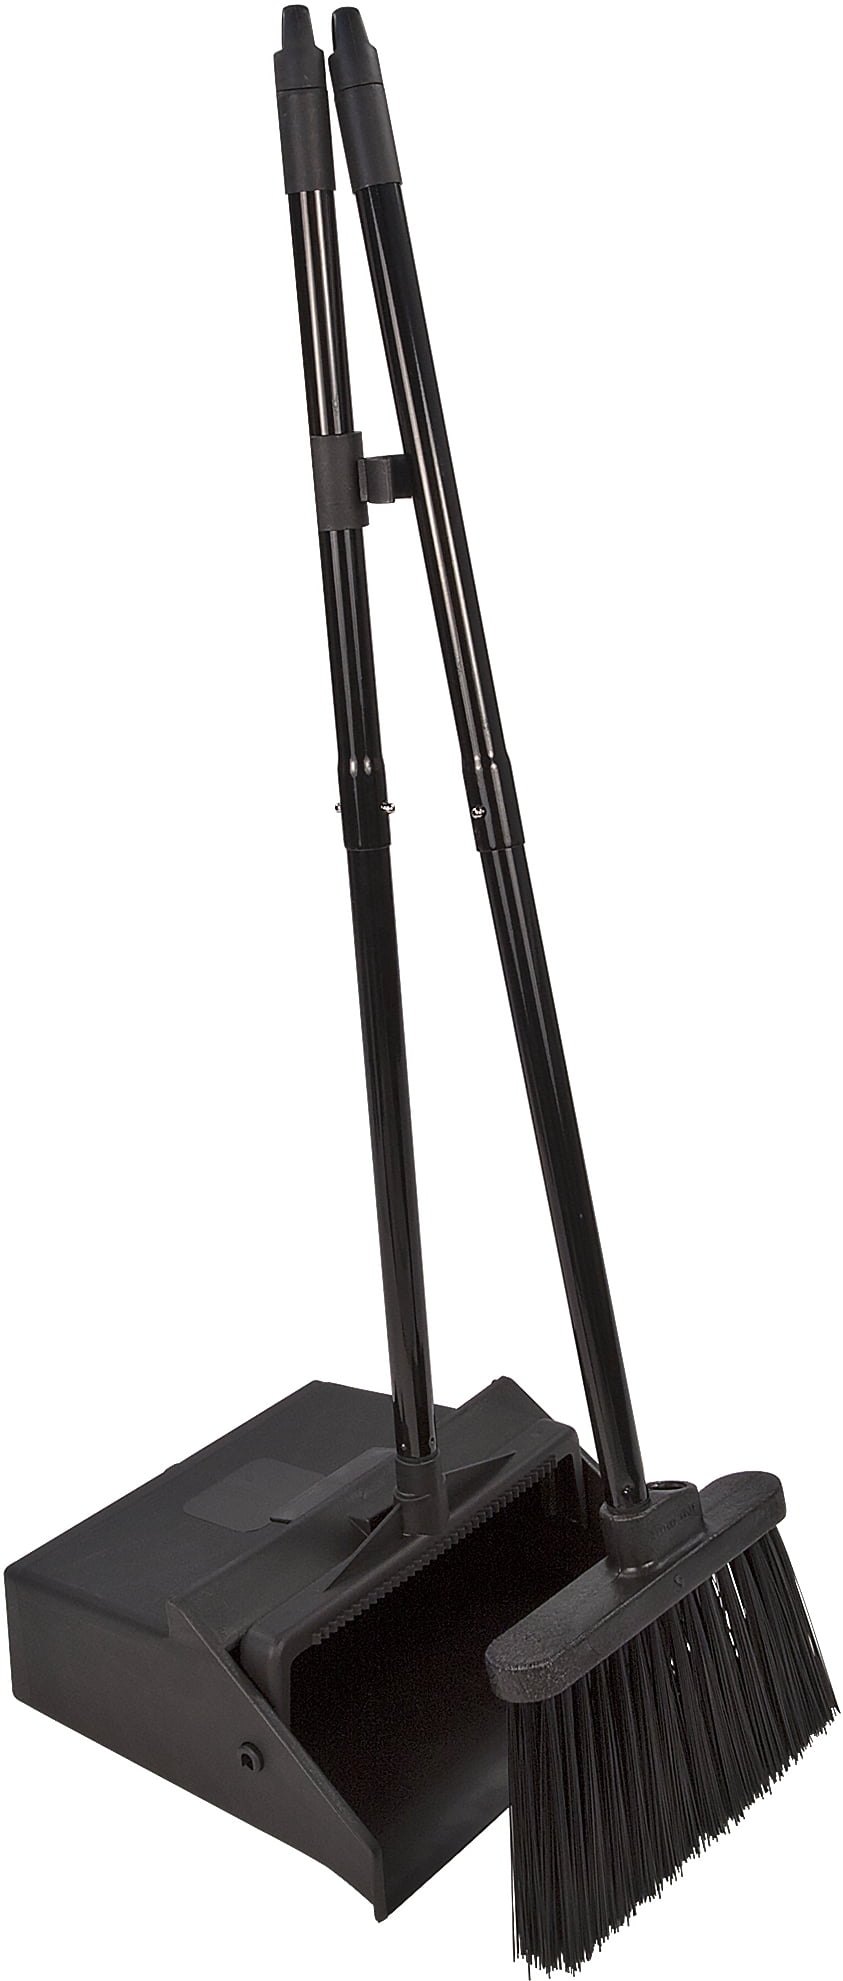 Lobby Dustpan And Brush With Self-Closing Lid Black For Picking Up Litter Paper 